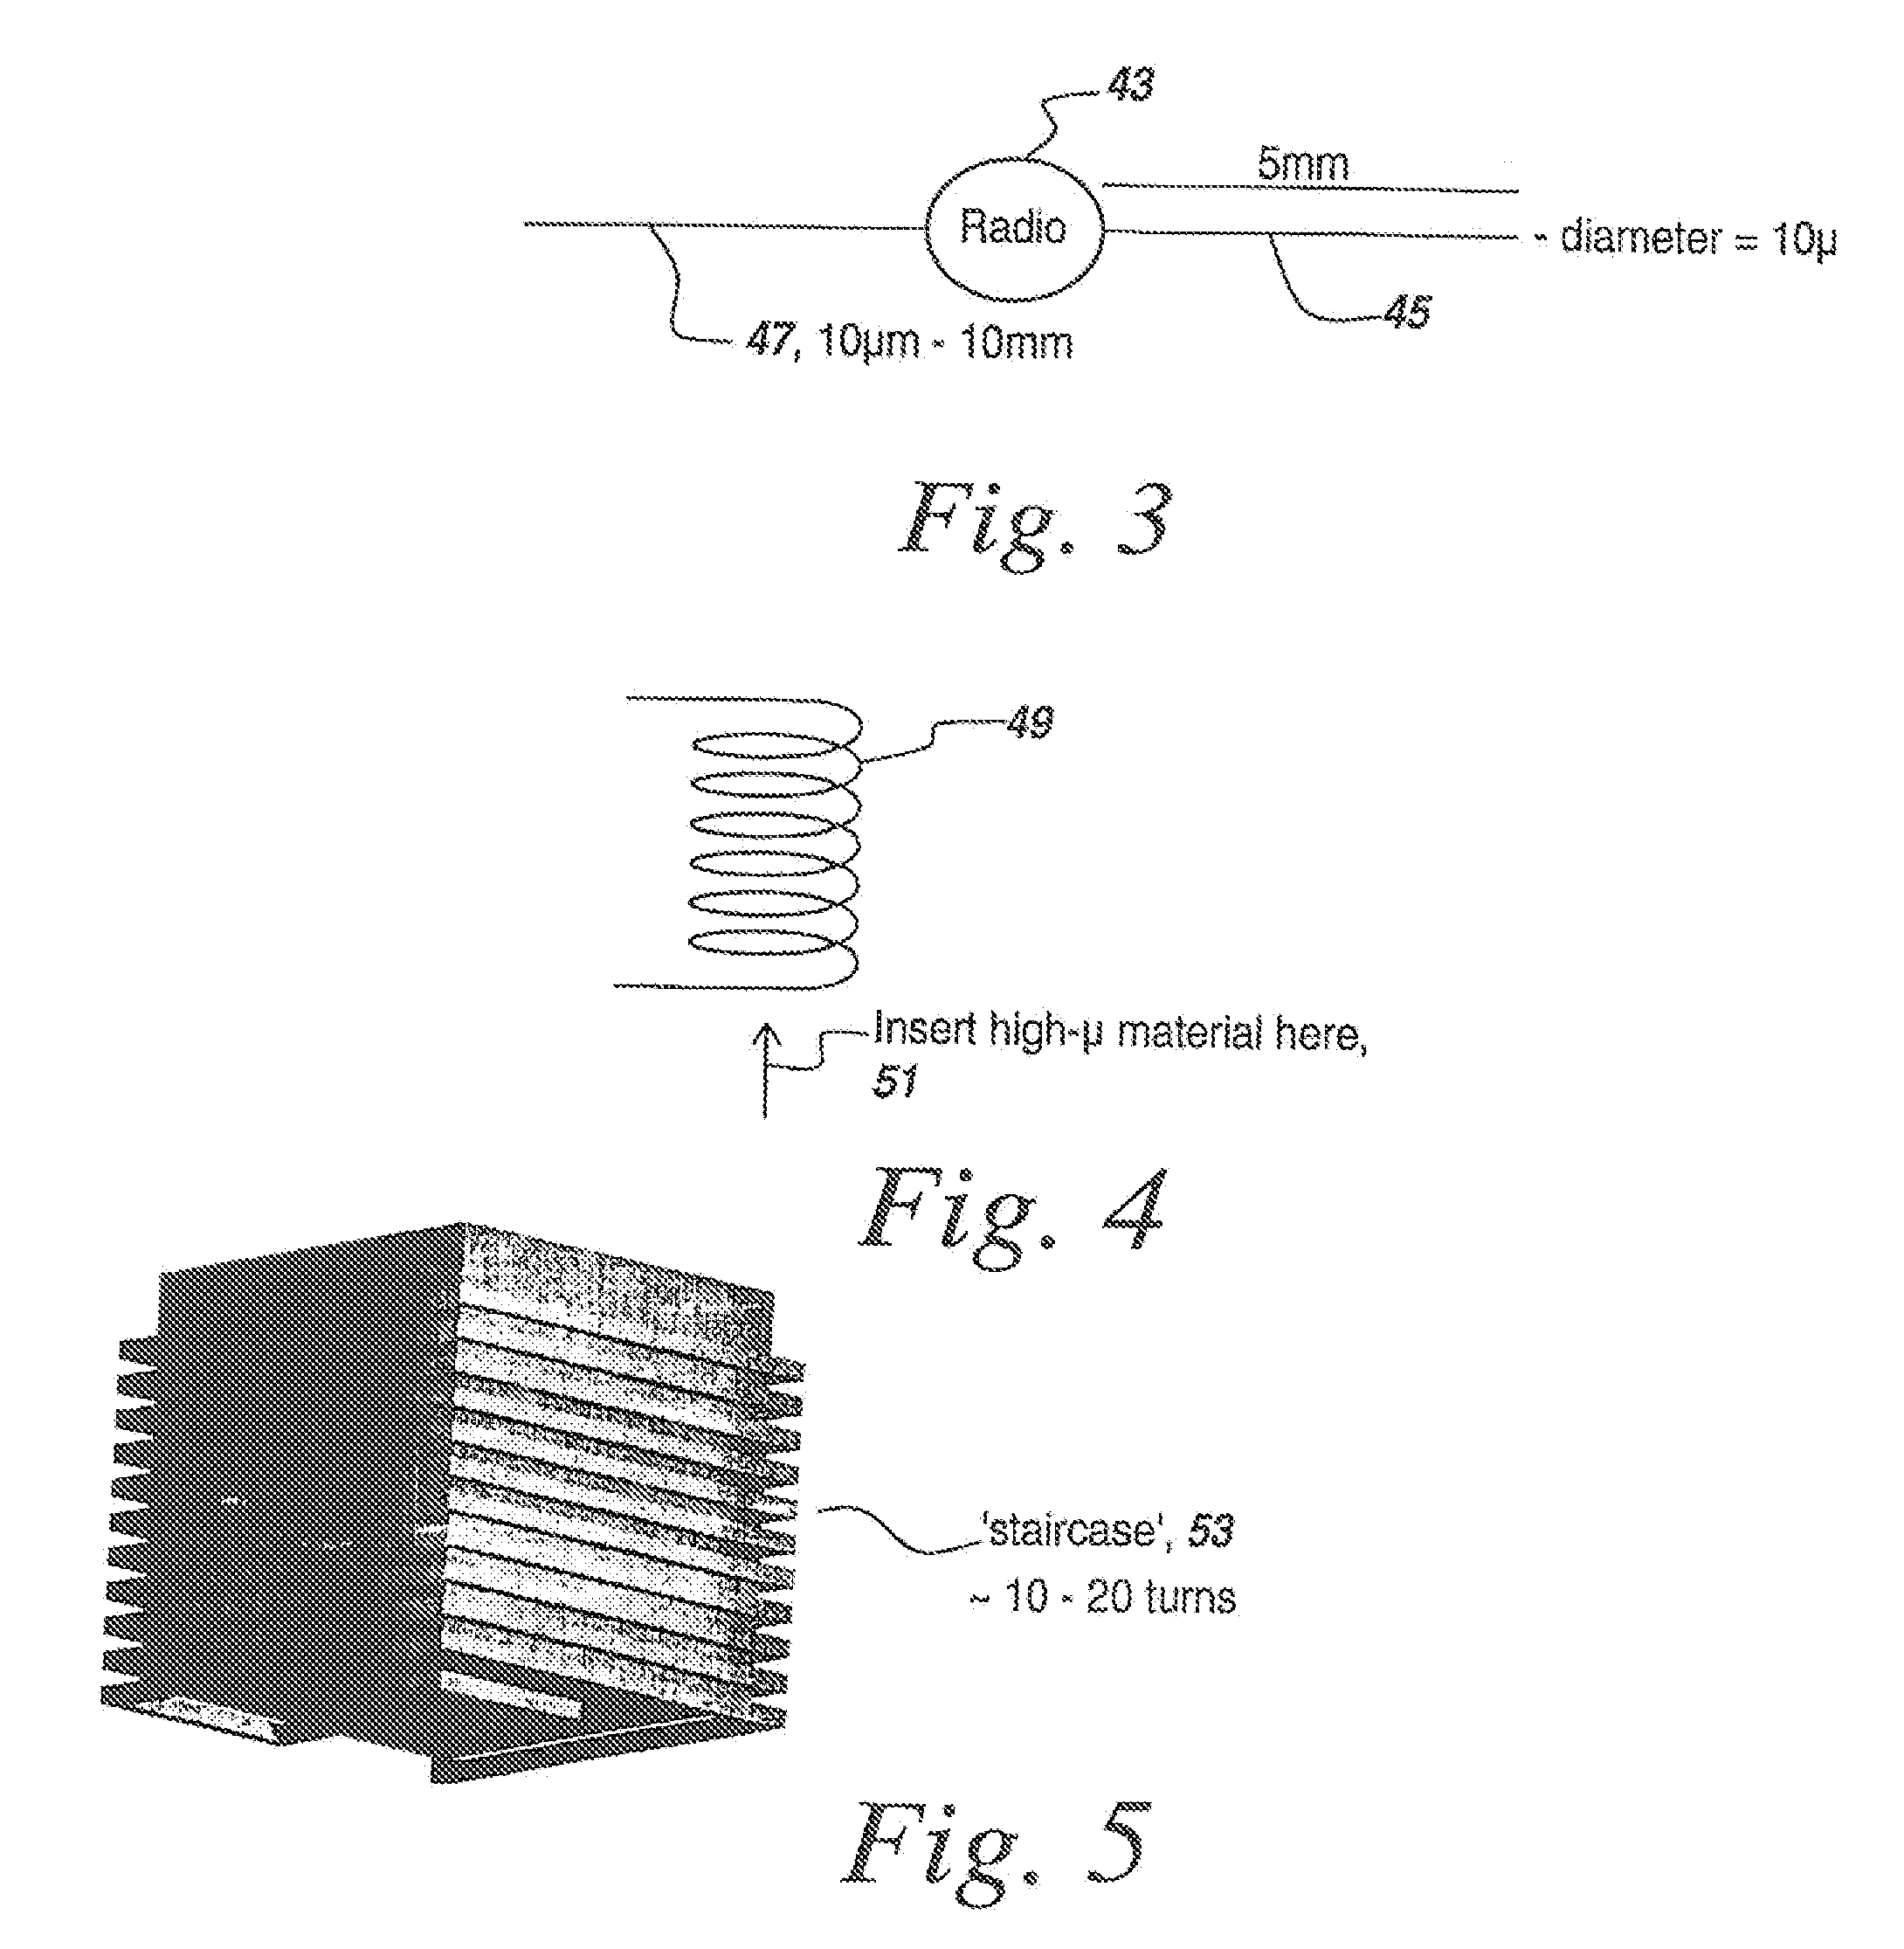 Method of determining conditions on the ground using microradios